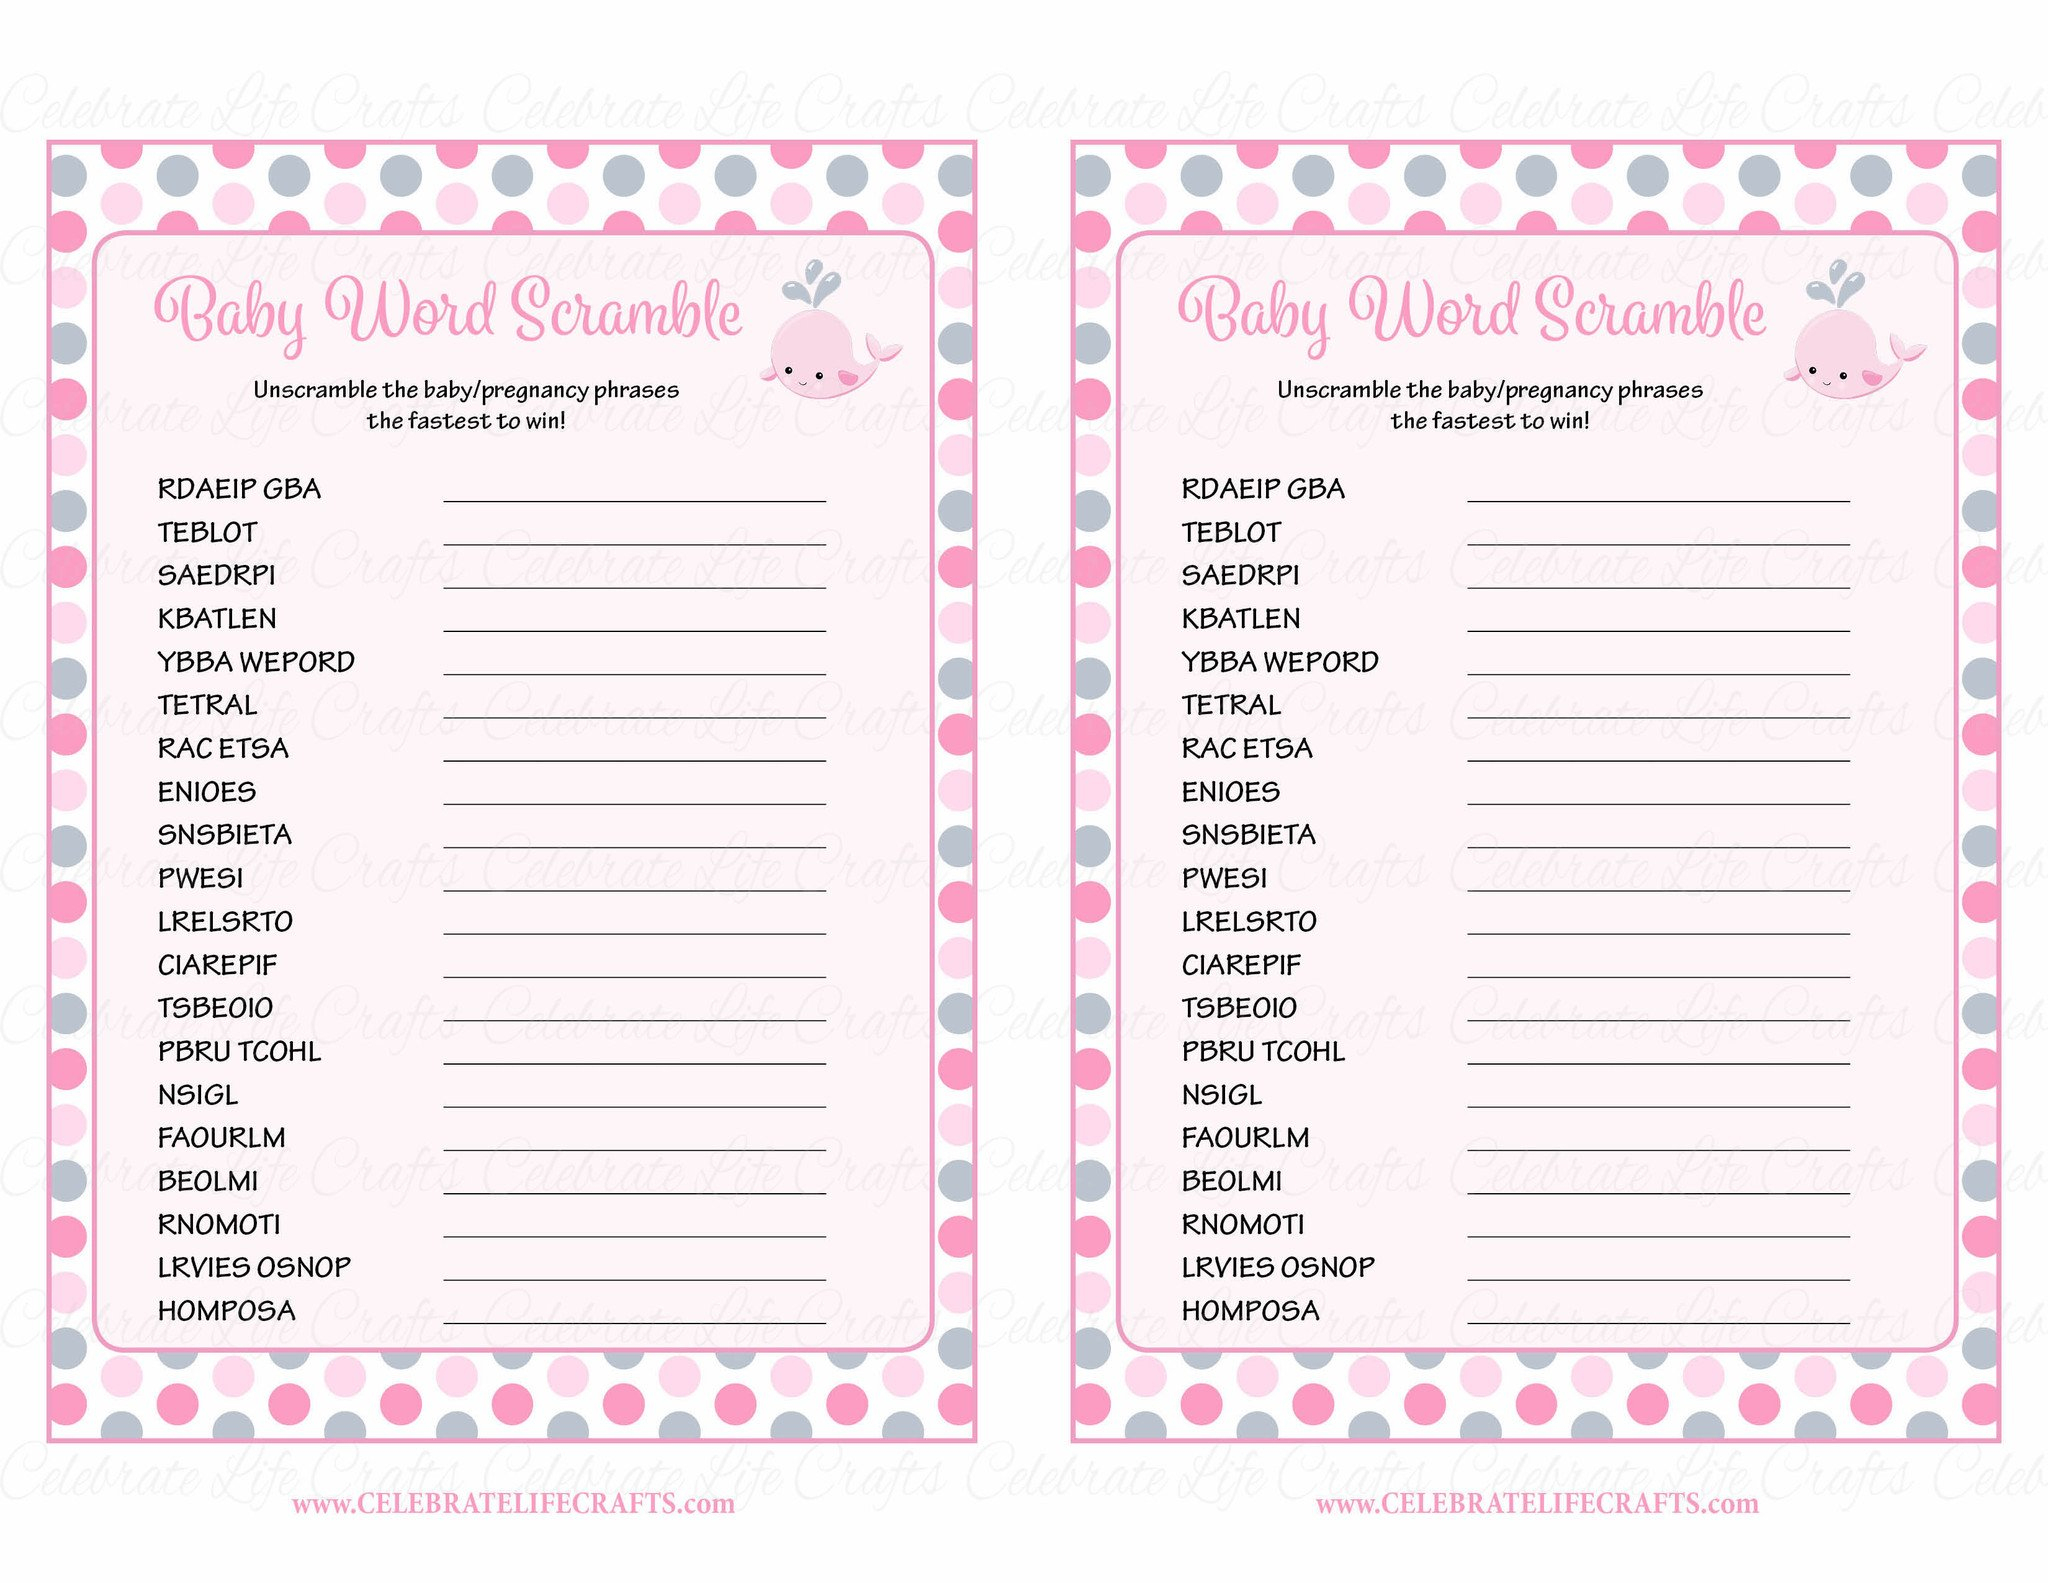 Free Baby Shower Word Scramble Game With Answers - Free Printable Baby Shower Word Scramble